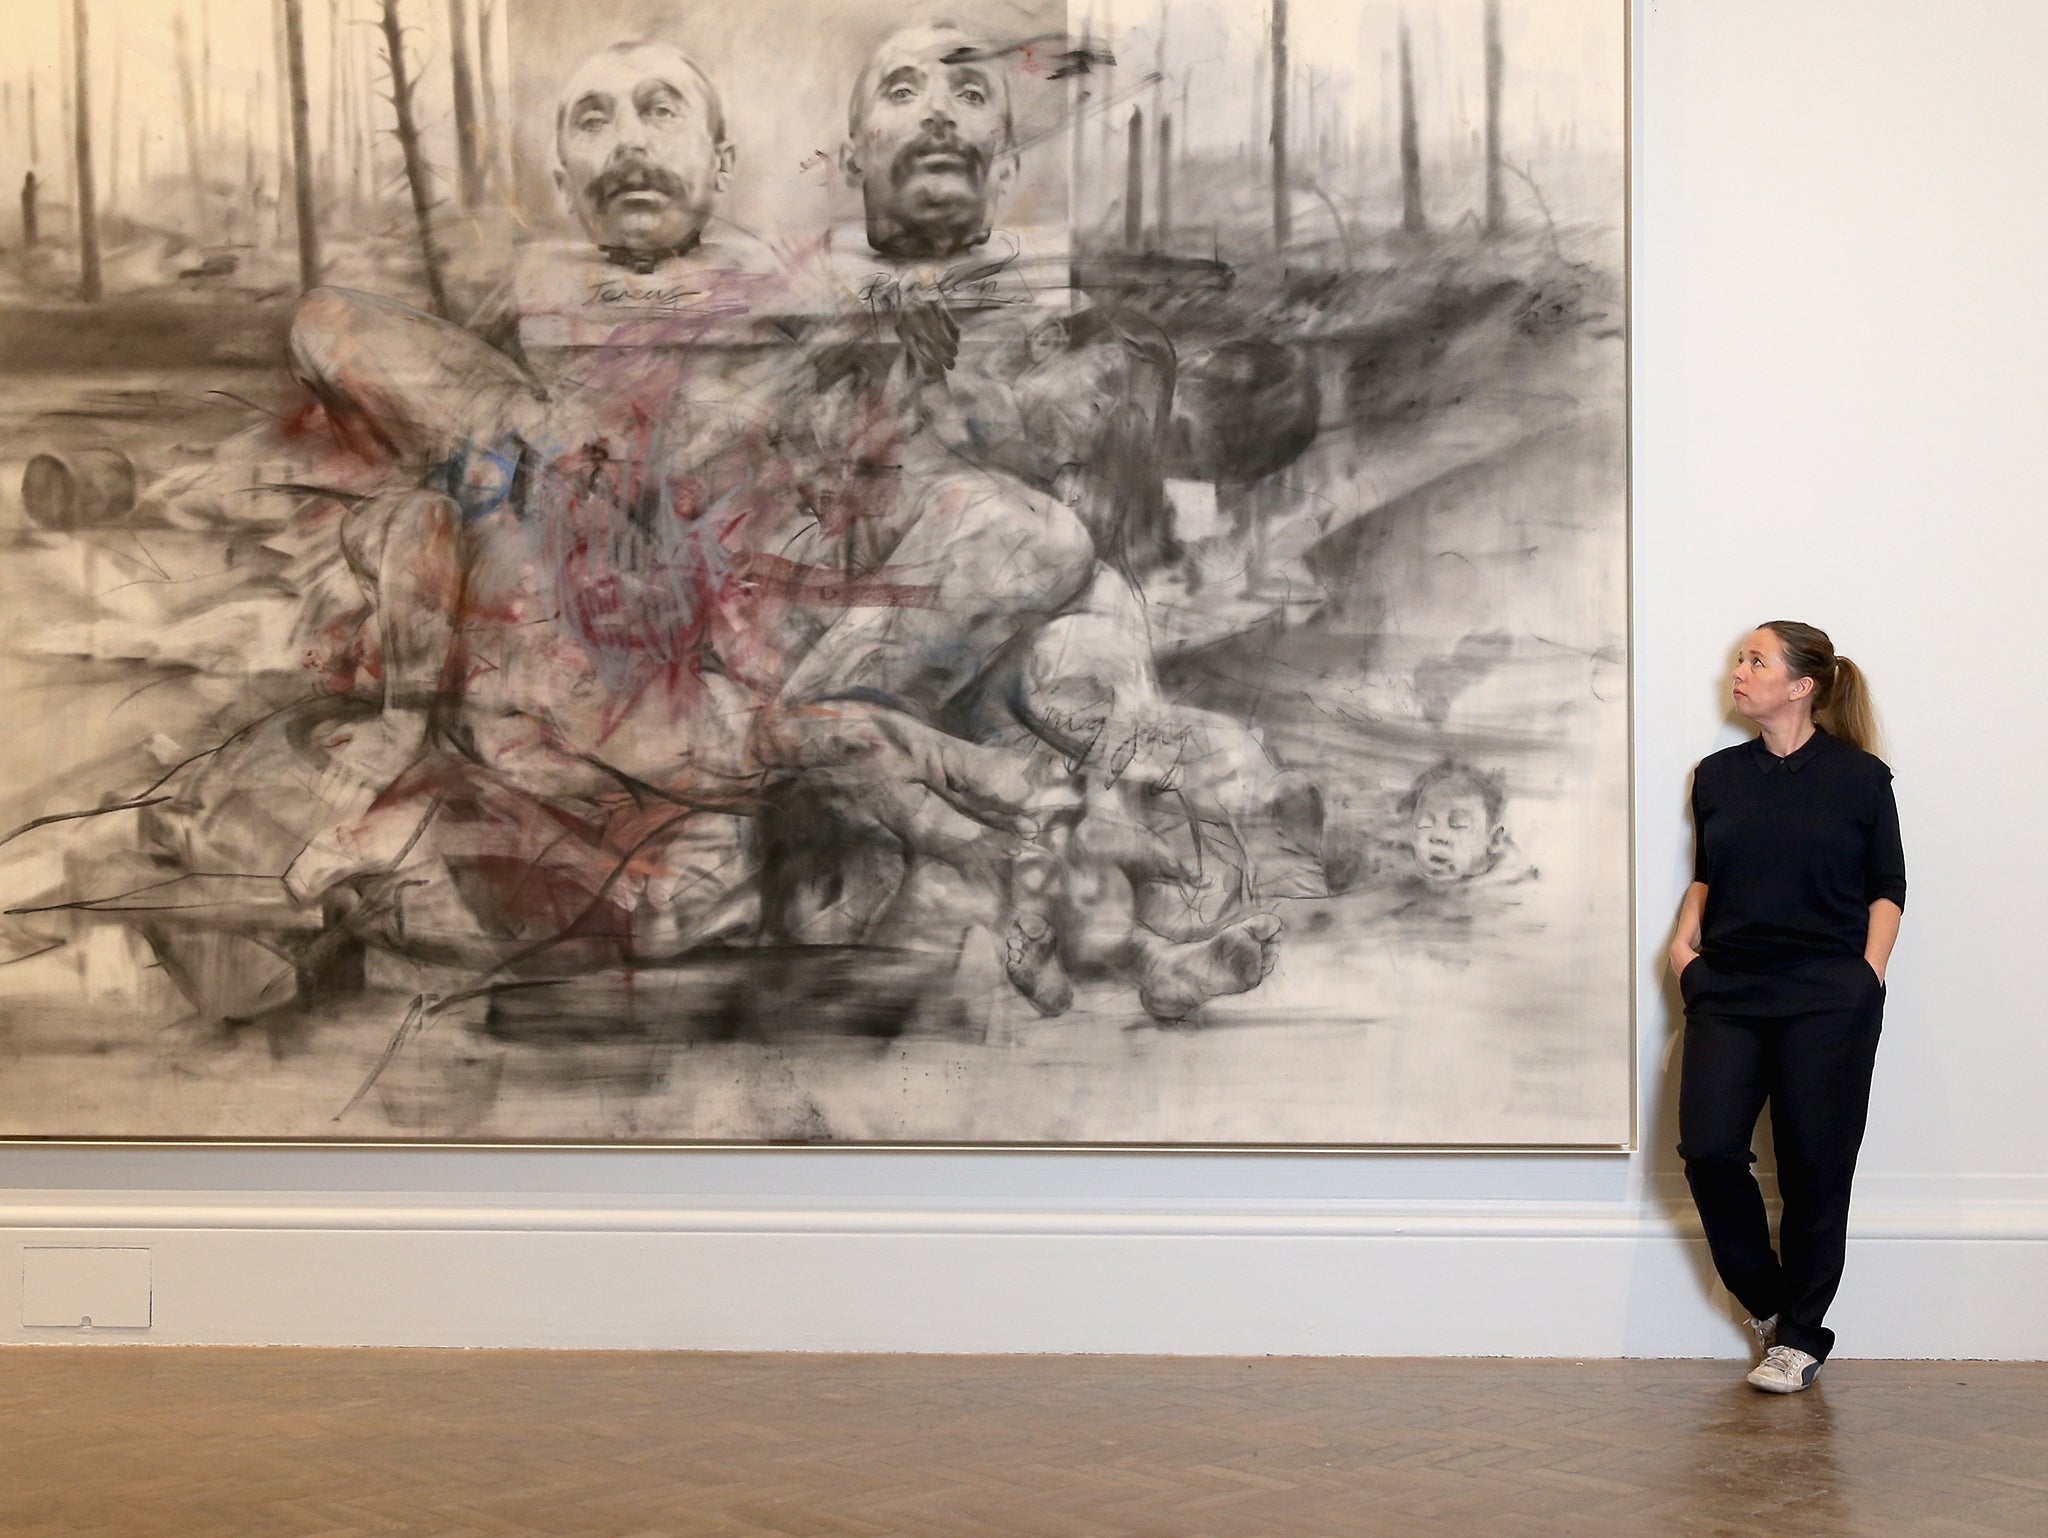 Artist Jenny Saville poses next to one of her works of art as she curates La Peregrina, A response to the Royal Academy's Rubens Exhibition at the Royal Academy of Arts